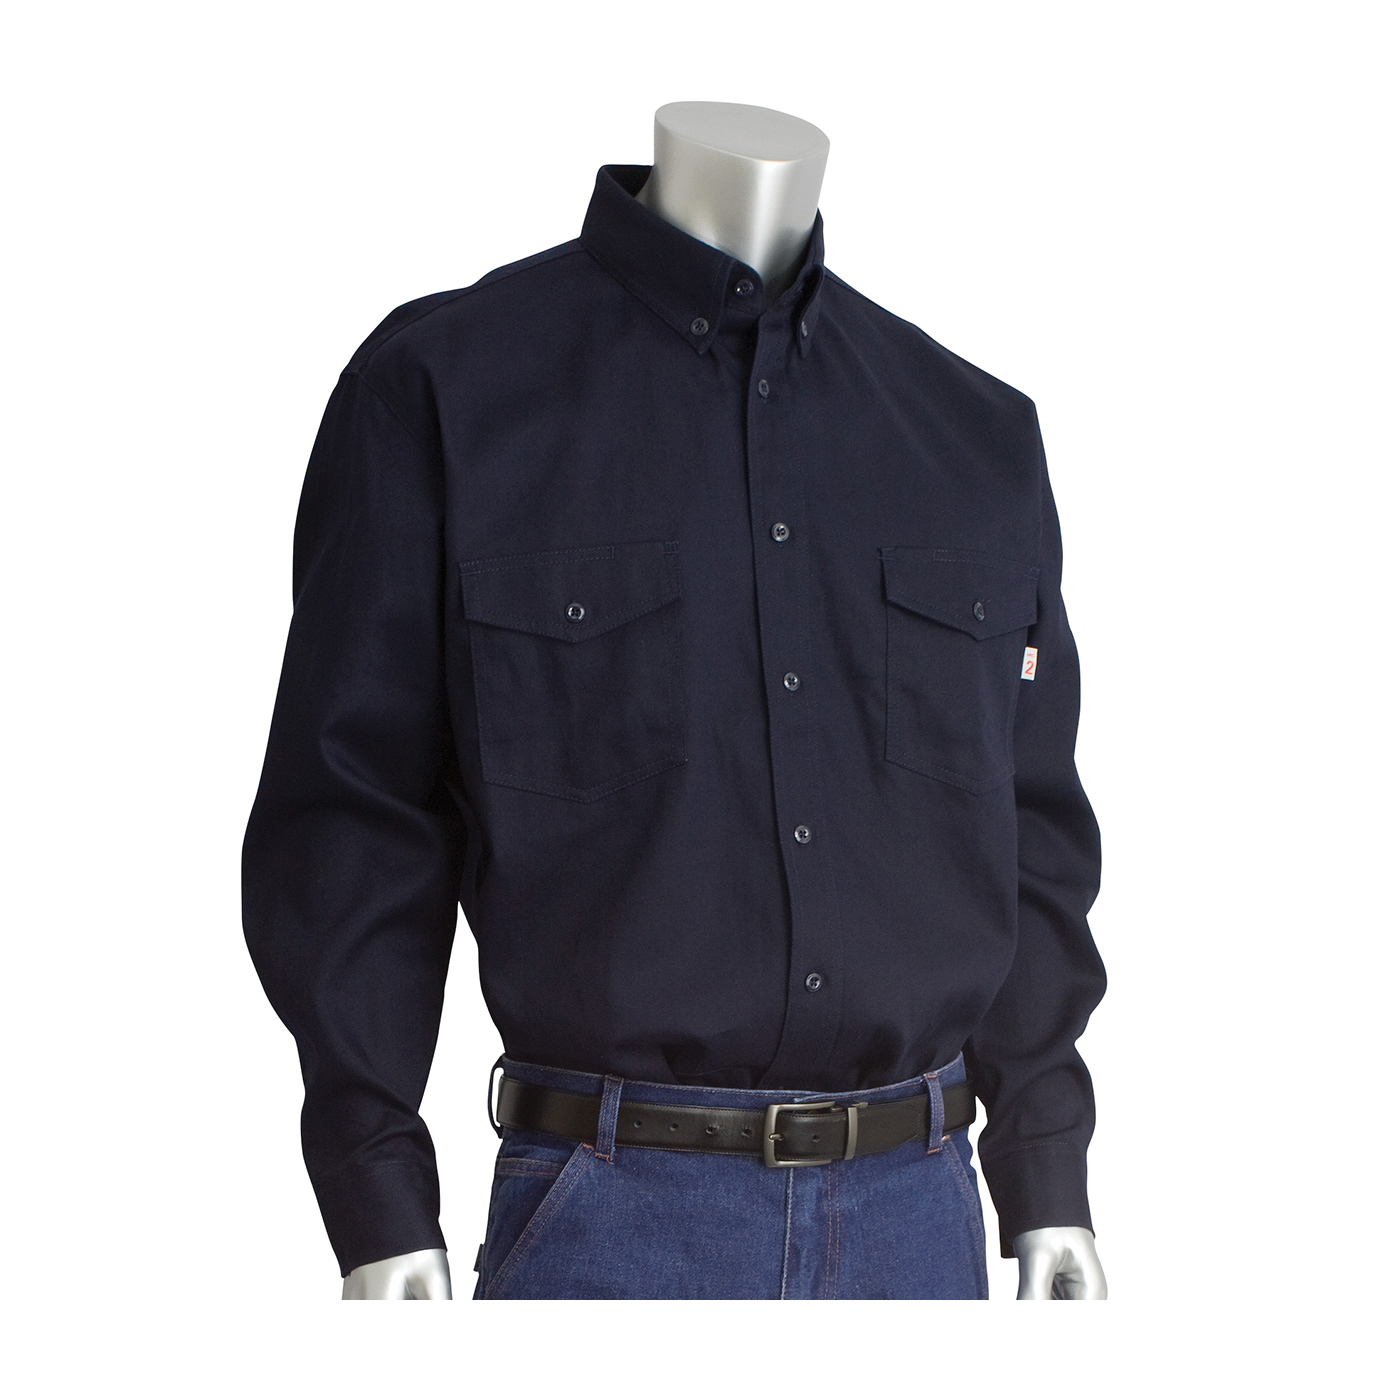 PIP® 385-FRWS-NV/4X Arc and Flame-Resistant Long Sleeve Work Shirt, 4XL, Navy Blue, 36-1/2 in L, 90% Cotton/10% Nylon